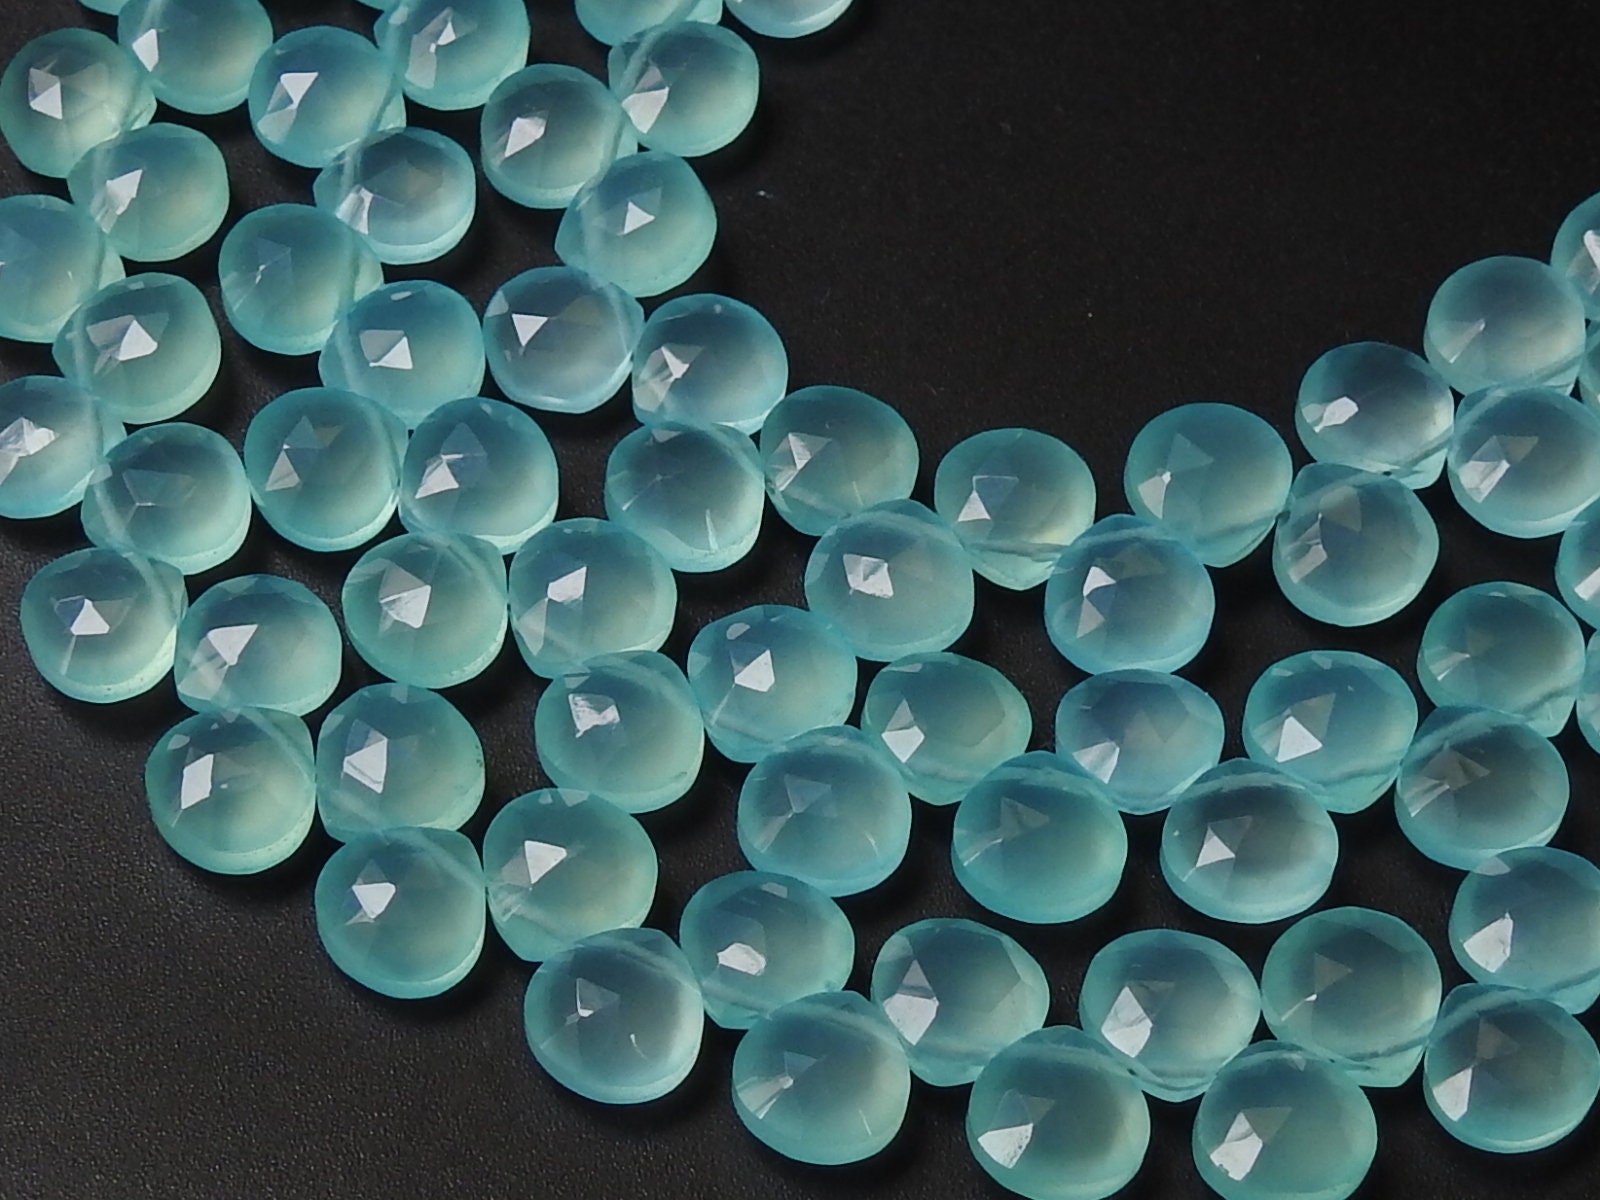 Aqua Blue Chalcedony Faceted Hearts,Teardrop,Drop,Loose Stone,Handmade,Earrings Pair,For Making Jewelry 4Inch Strand 8X8 MM Approx (pme)CY2 | Save 33% - Rajasthan Living 18